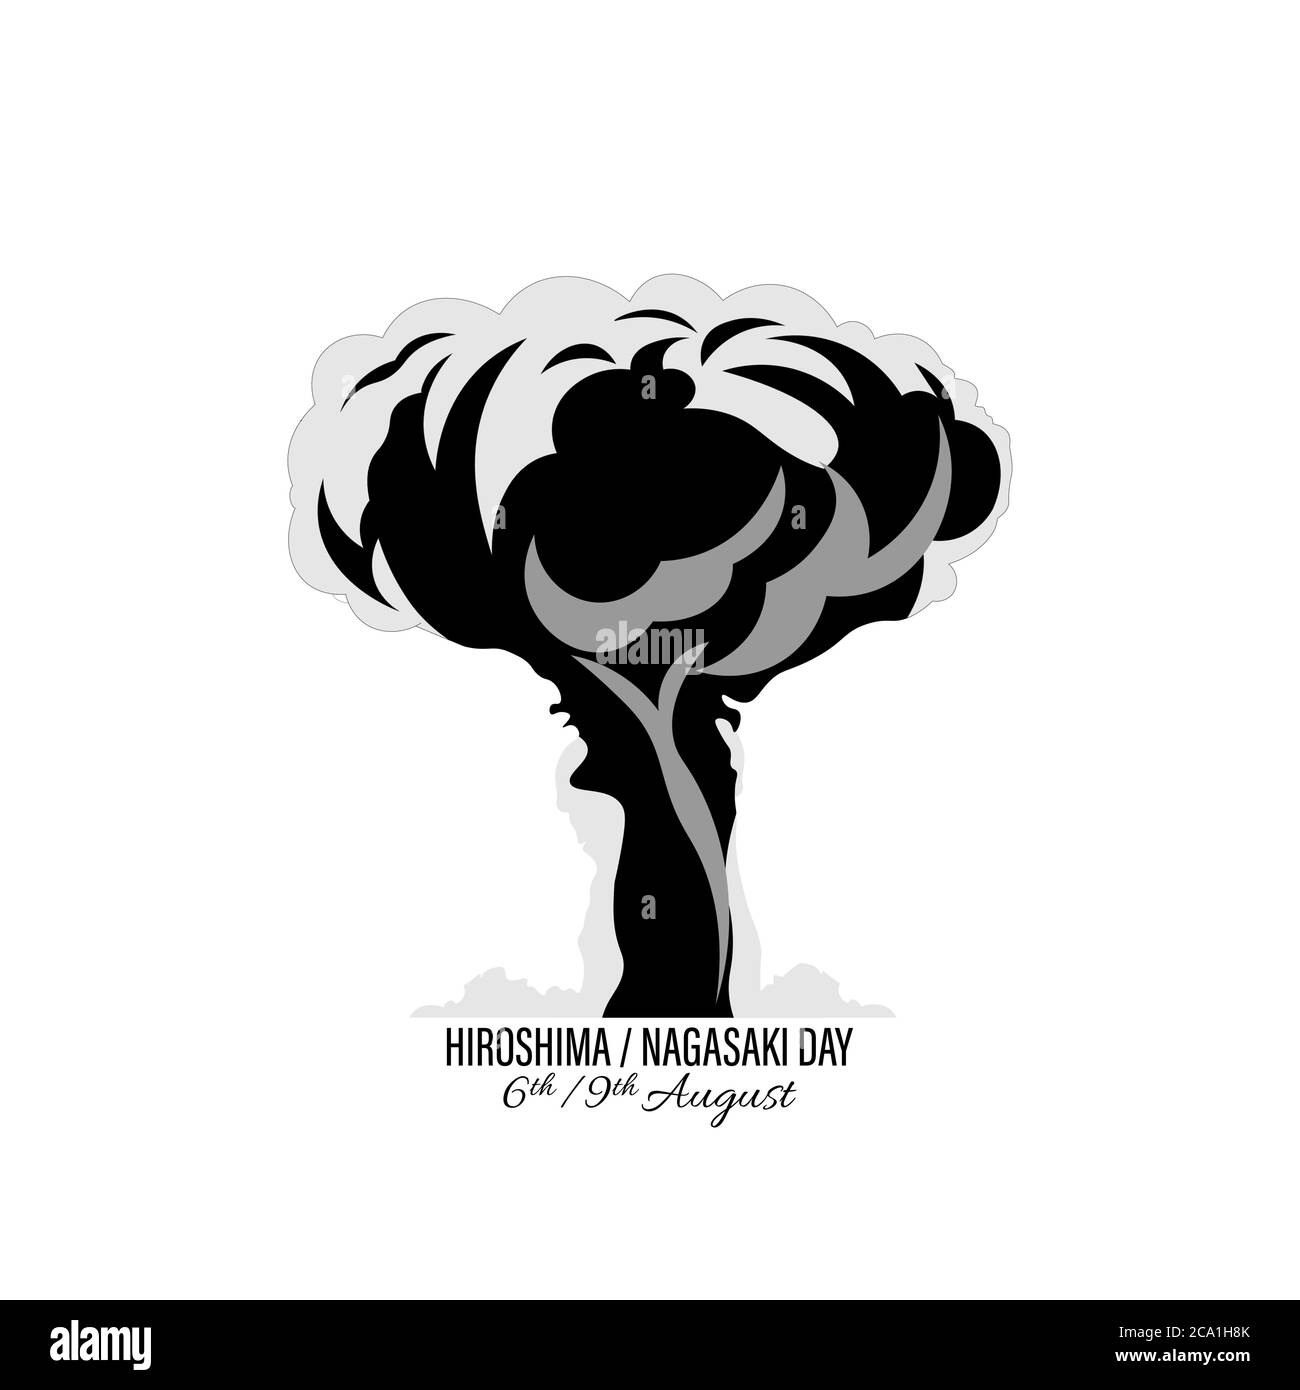 Nuclear explosion vector illustration isolated on white background. International day against nuclear tests. Hiroshima remembrance day minimal style c Stock Vector